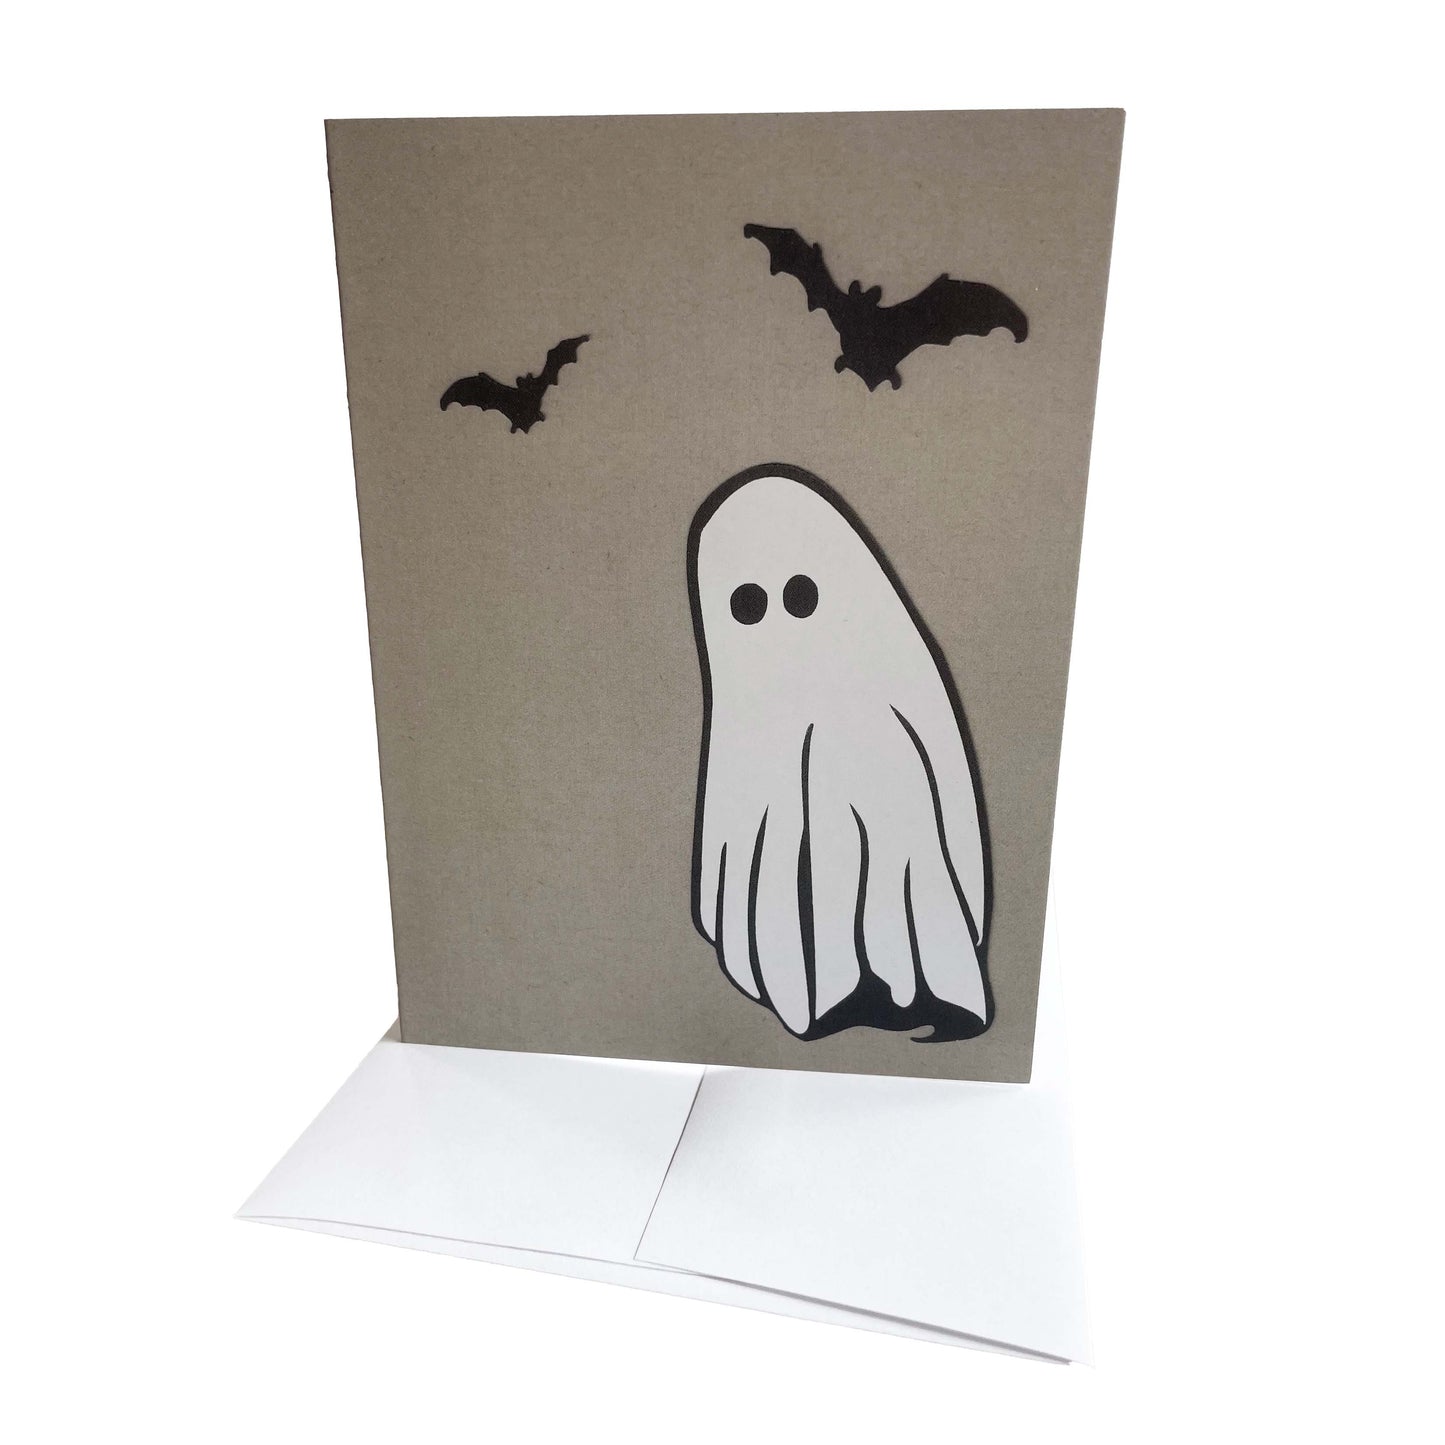 Spooky Ghost and Bats Handmade Cut Paper Card